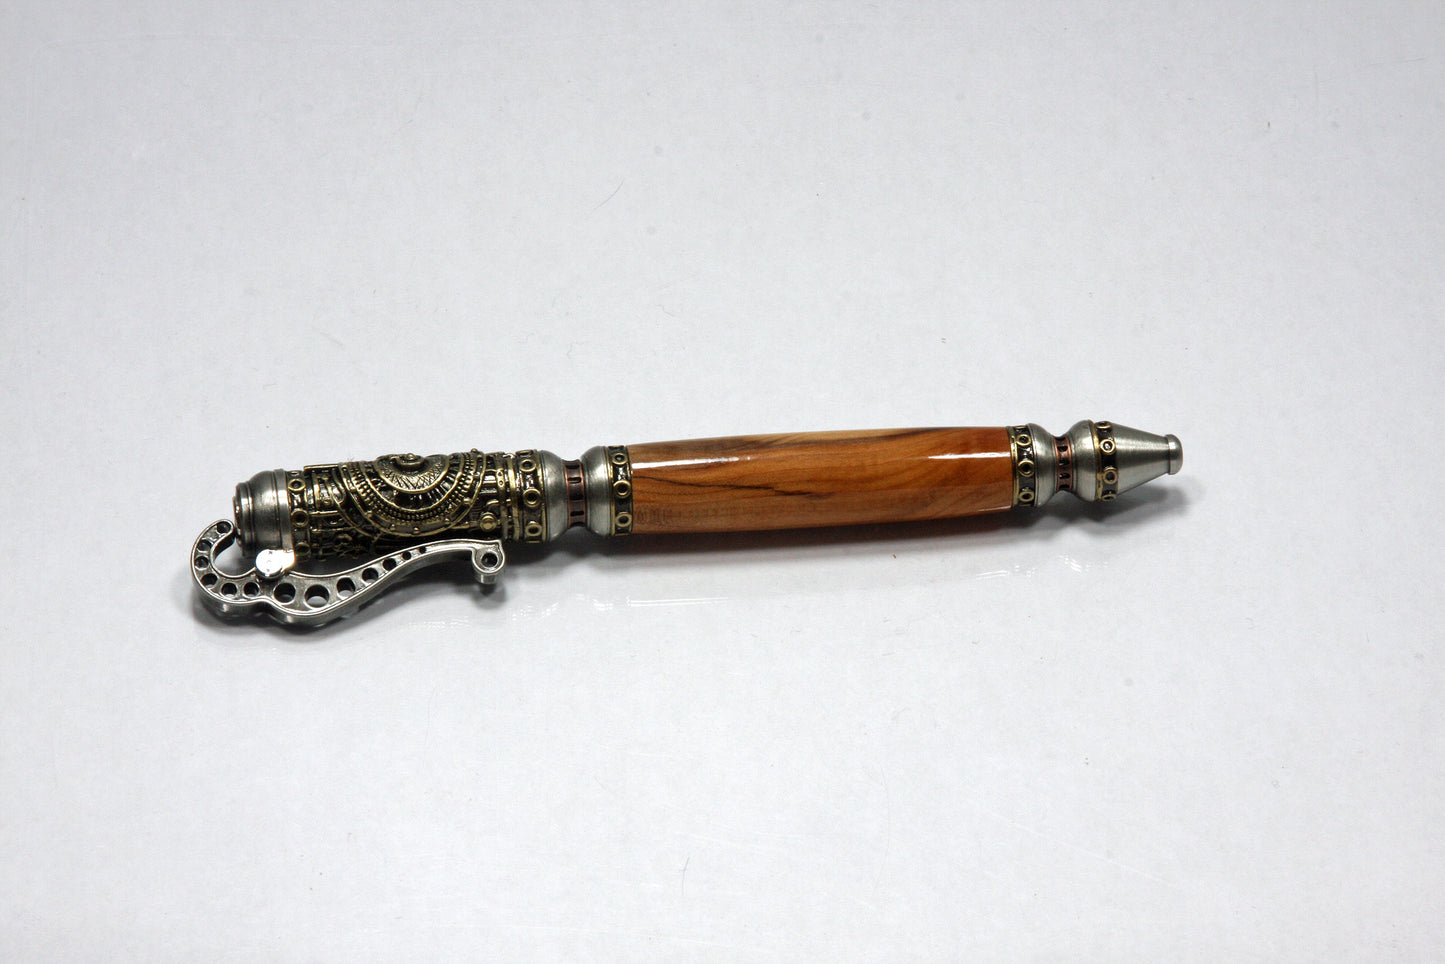 Dr. Who Forest of Dean Steampunk Ballpoint Pen - Handcrafted Yew Wood, Vintage Aesthetics, Collector's Delight